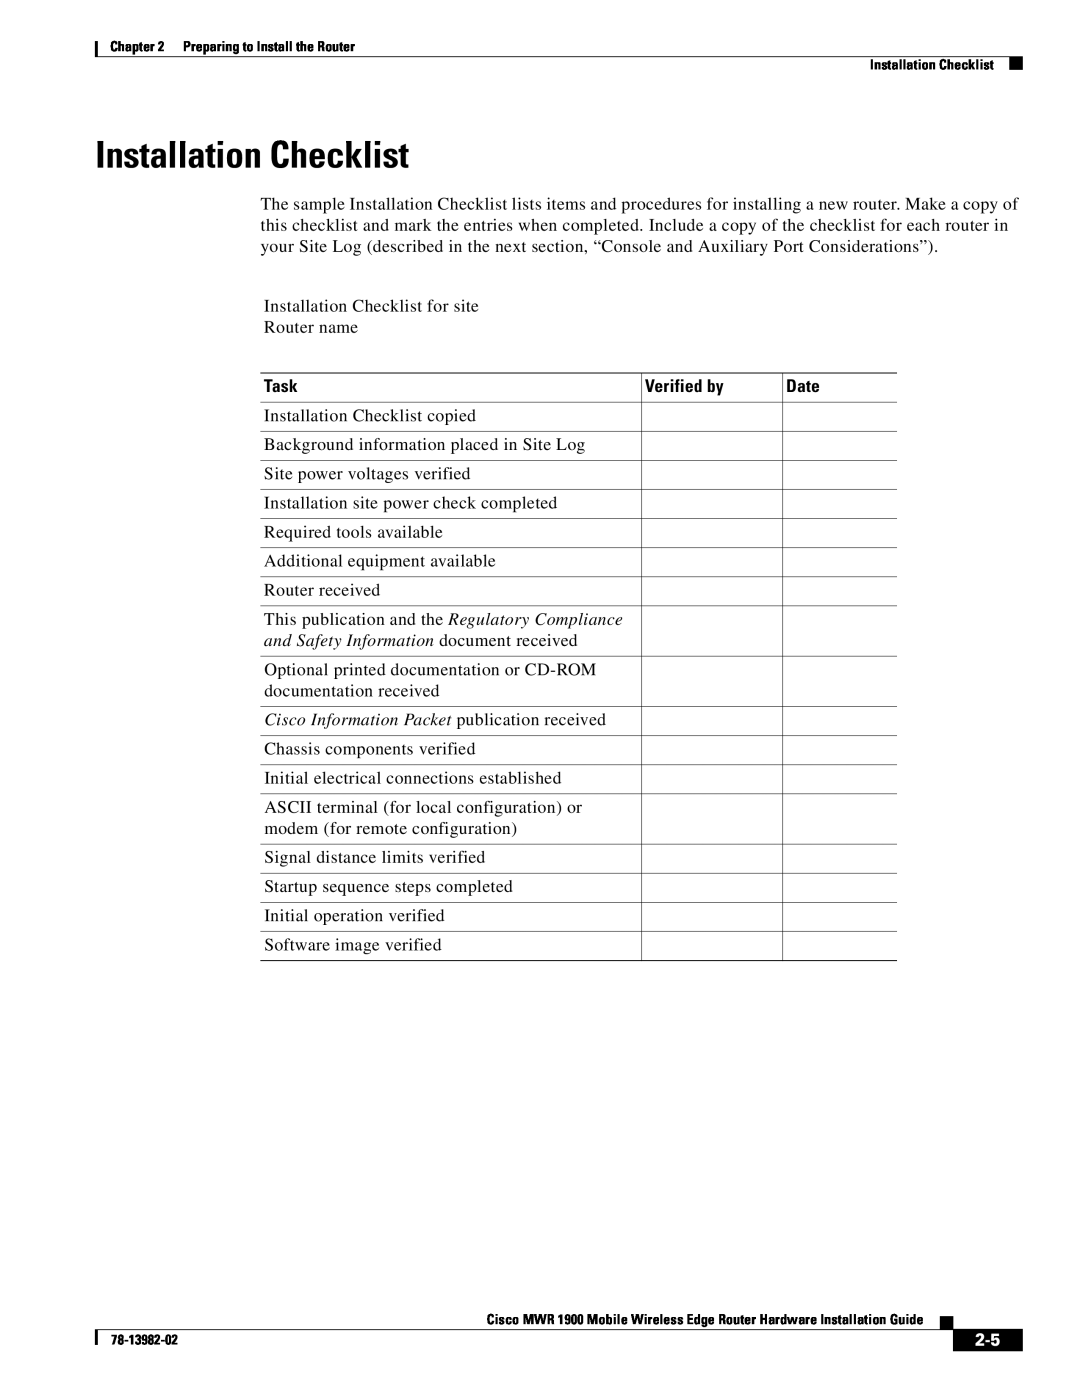 Cisco Systems MWR 1900 manual Installation Checklist, and Safety Information document received, Task, Verified by, Date 